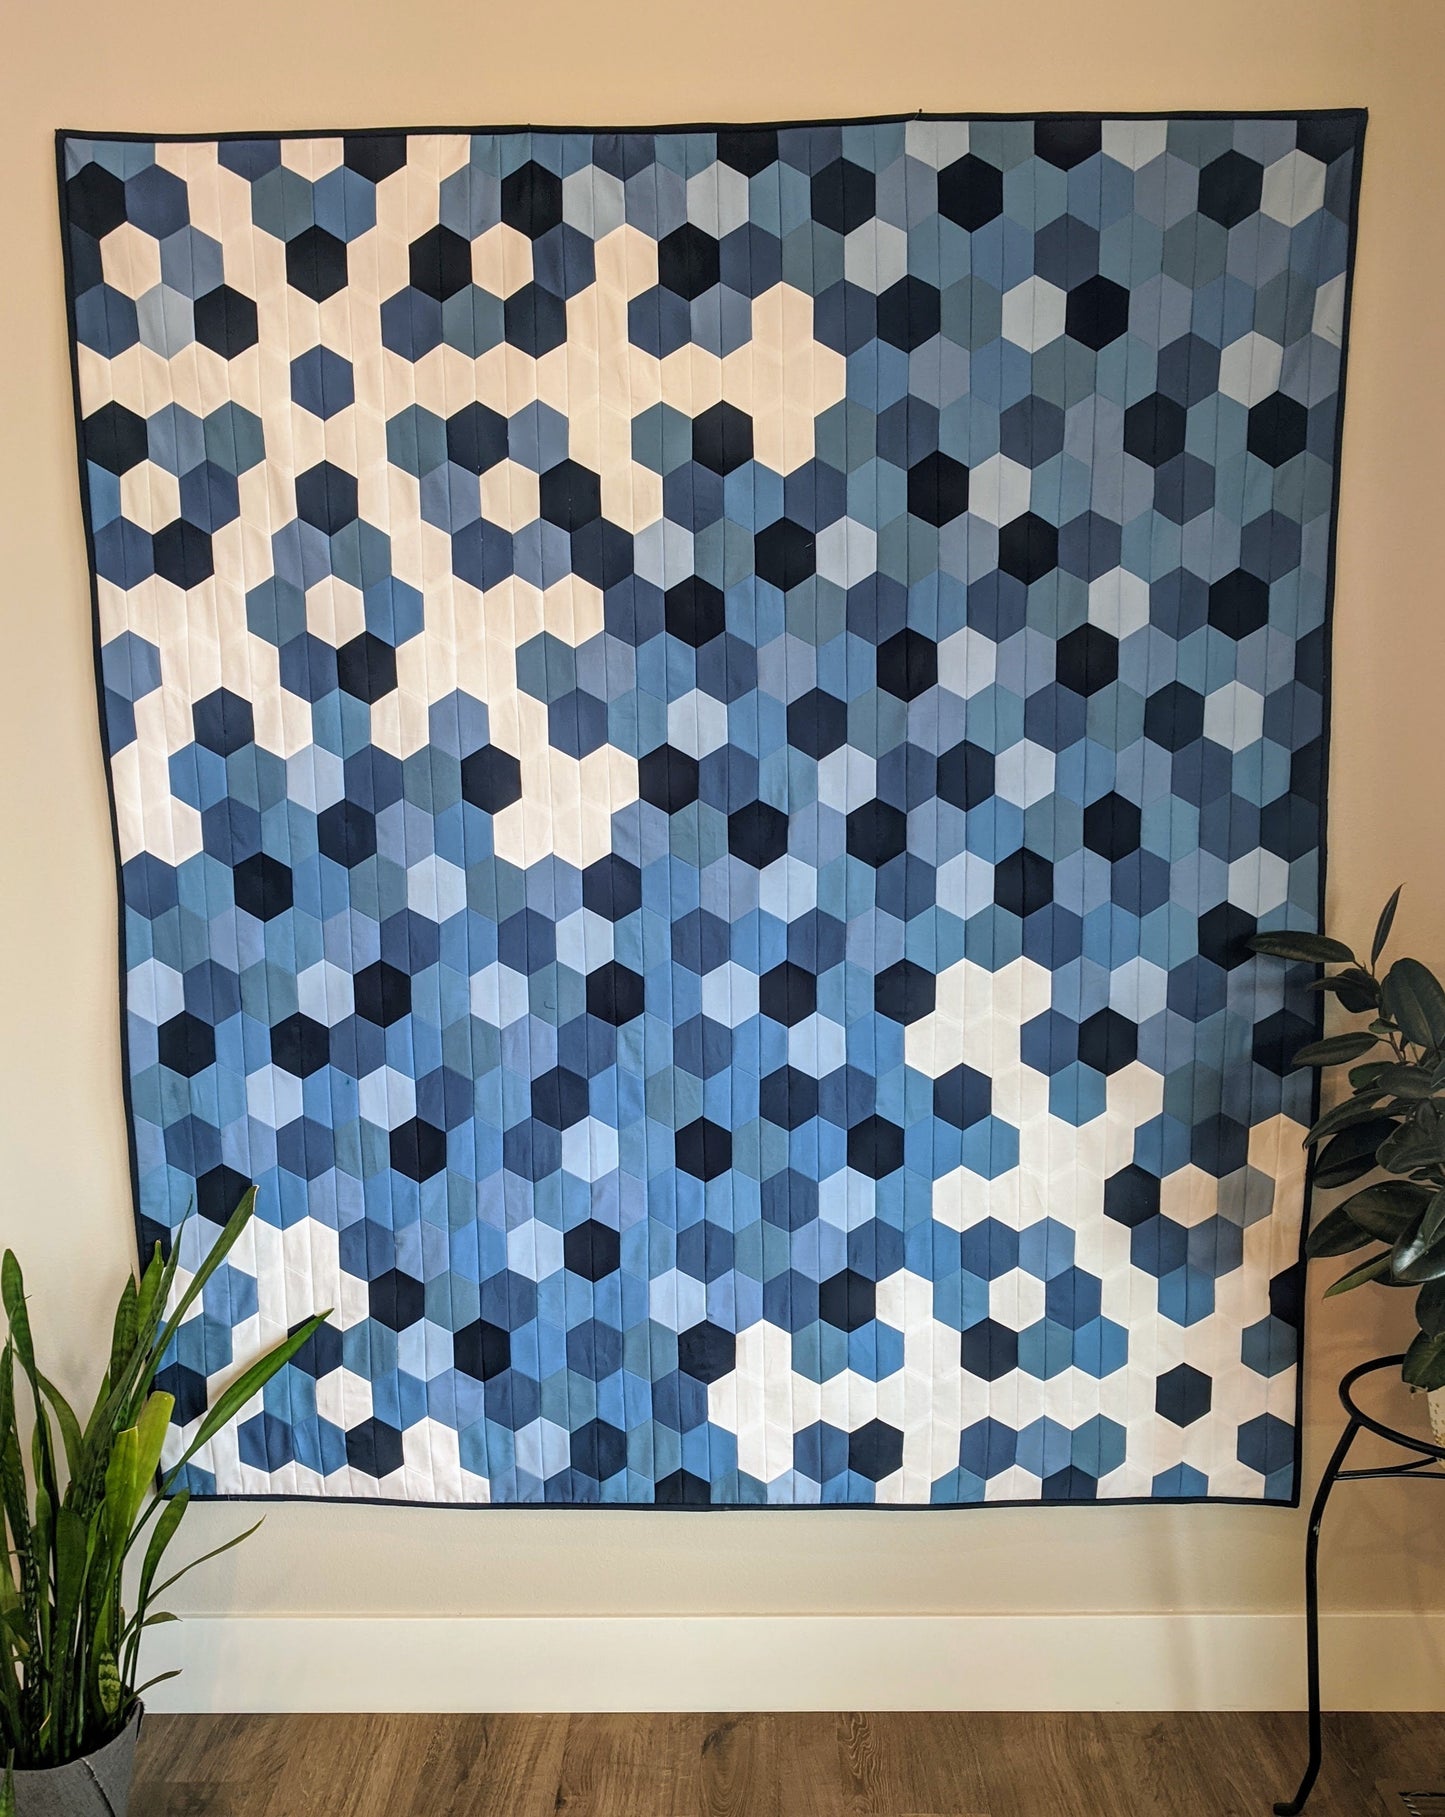 Scrappy blue and white snowflake and hexagon quilt on wall.